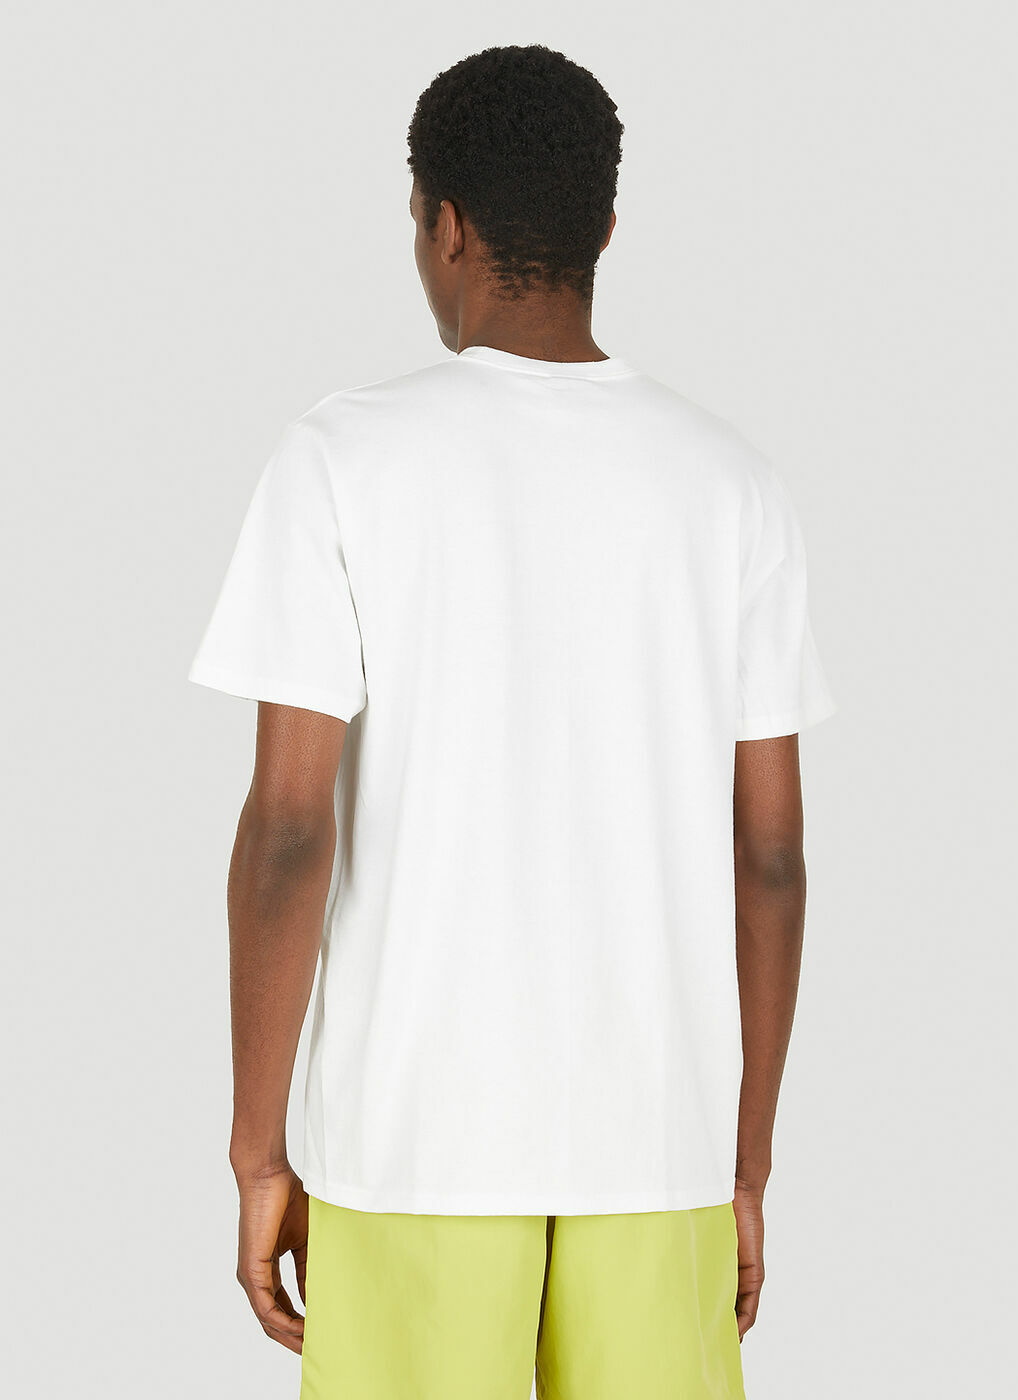 House of Cards Logo T-Shirt in White Stussy